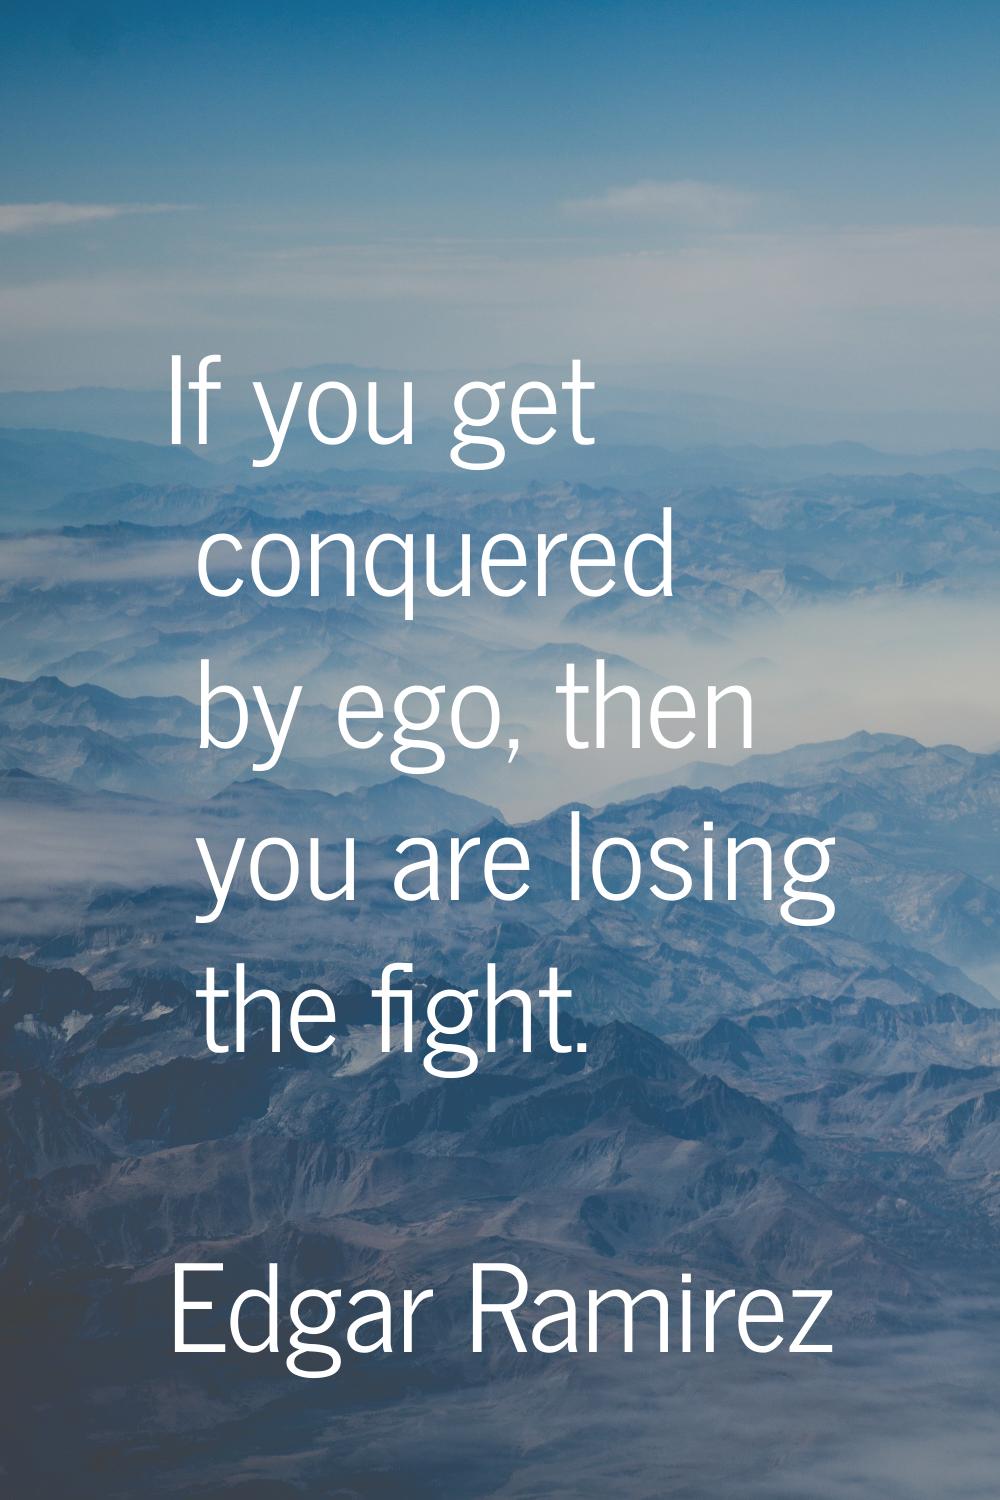 If you get conquered by ego, then you are losing the fight.